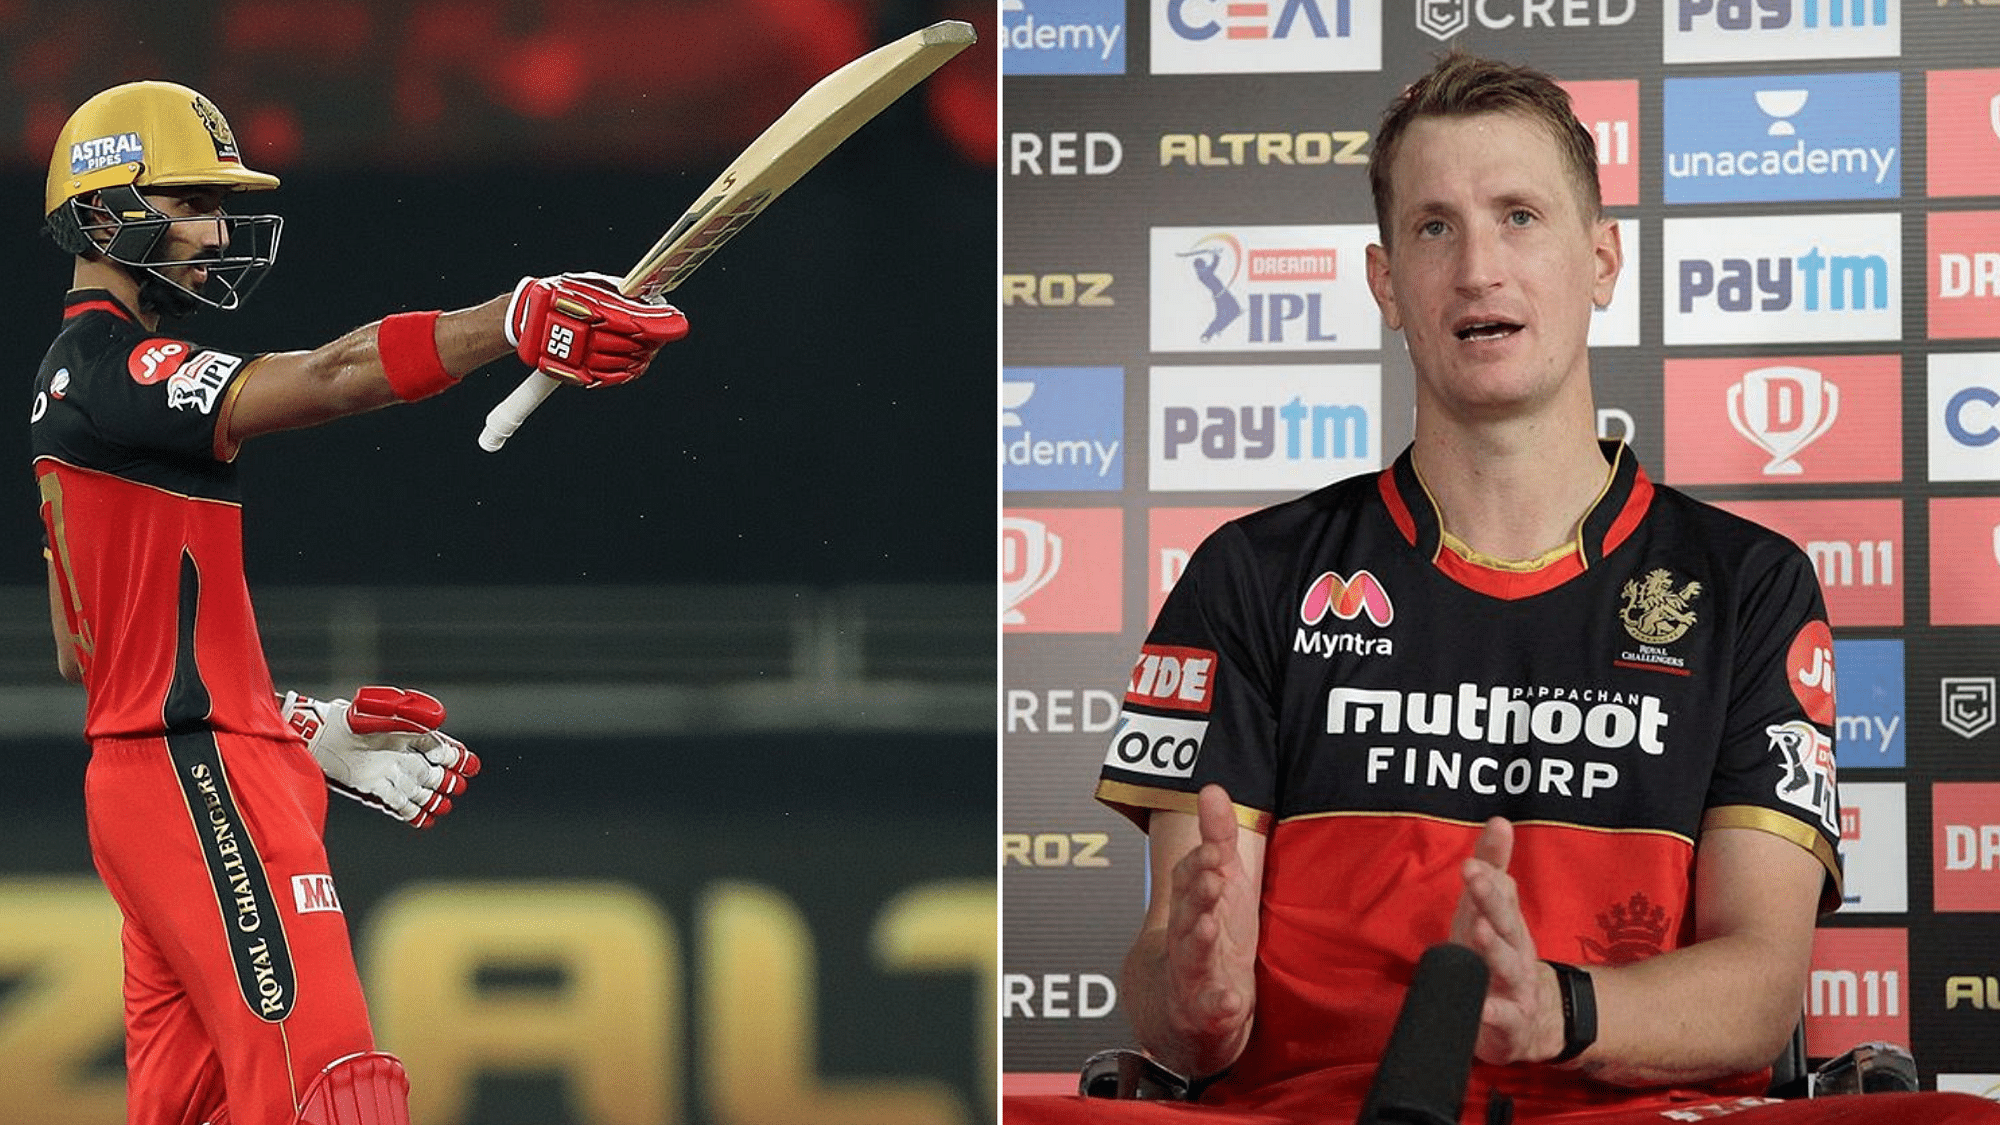 Devdutt Padikkal’s Royal Challengers Bangalore teammate Chris Morris praised him for his batting and the way he conducts himself on the field.